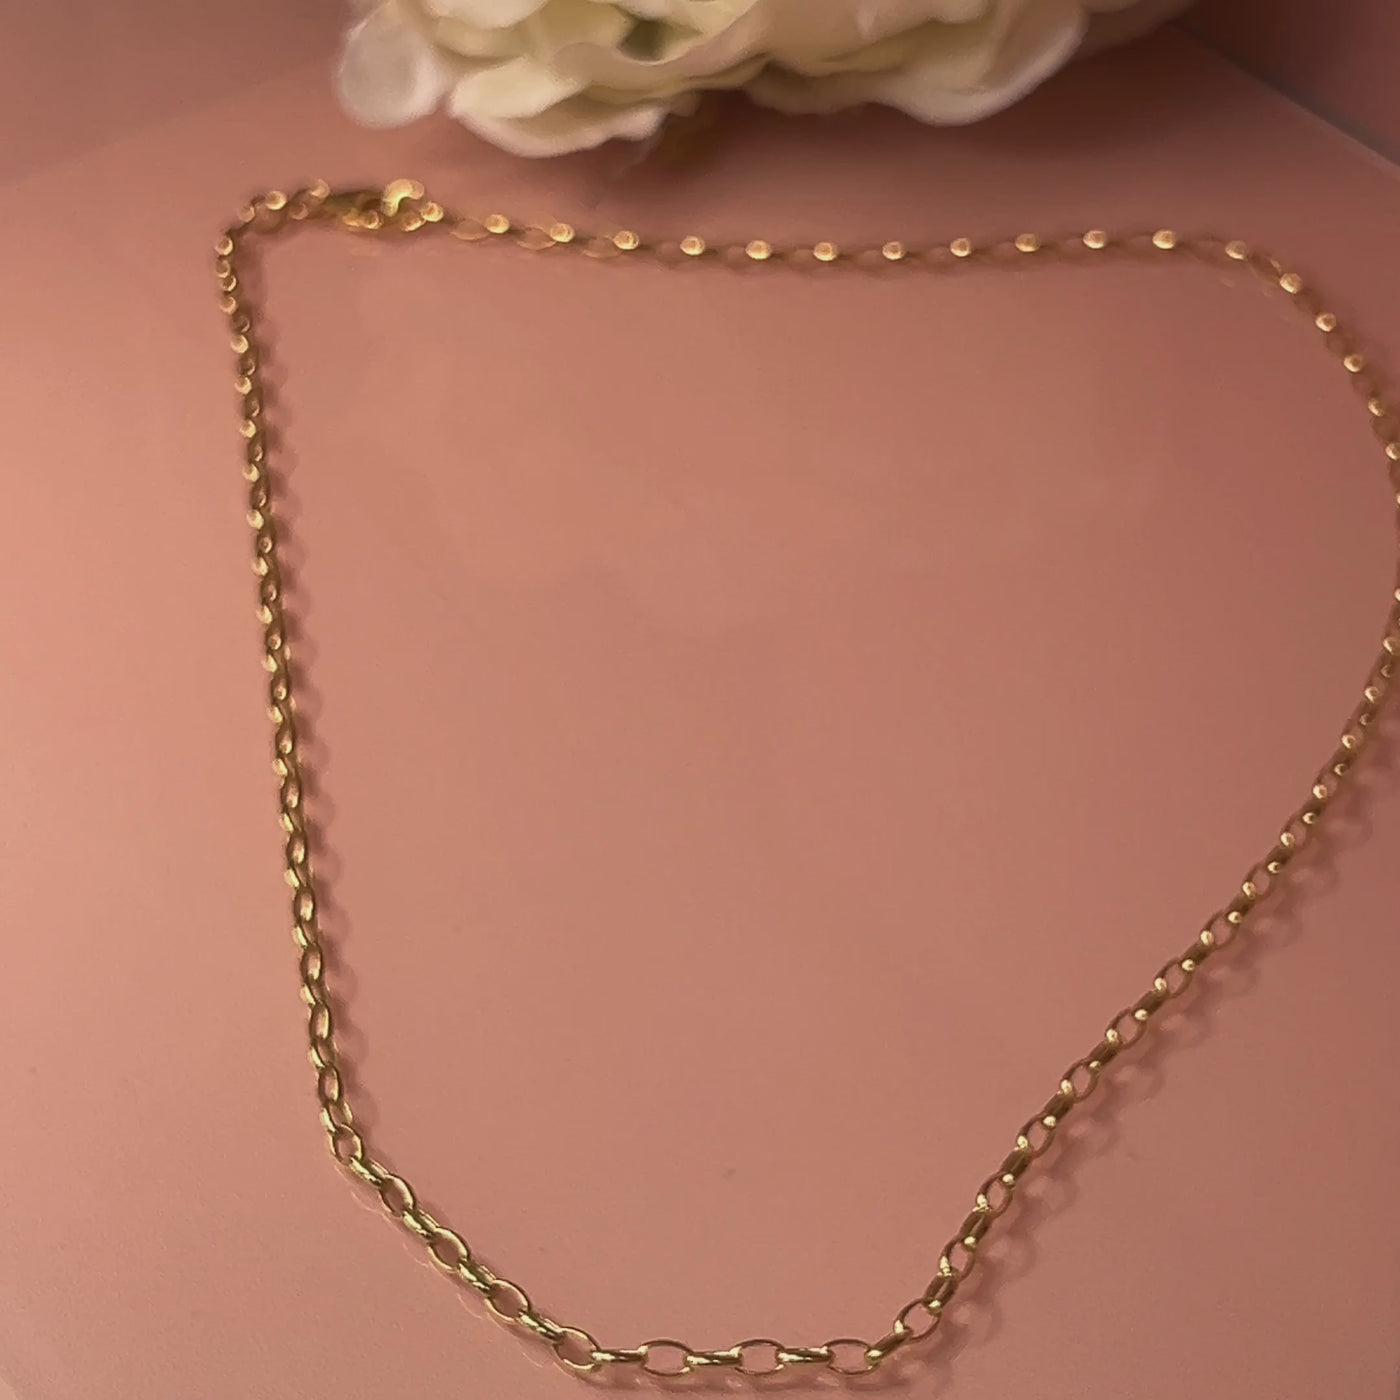 45cm 9ct Yellow Gold Silver Filled Oval Belcher Chain - 45cm length.